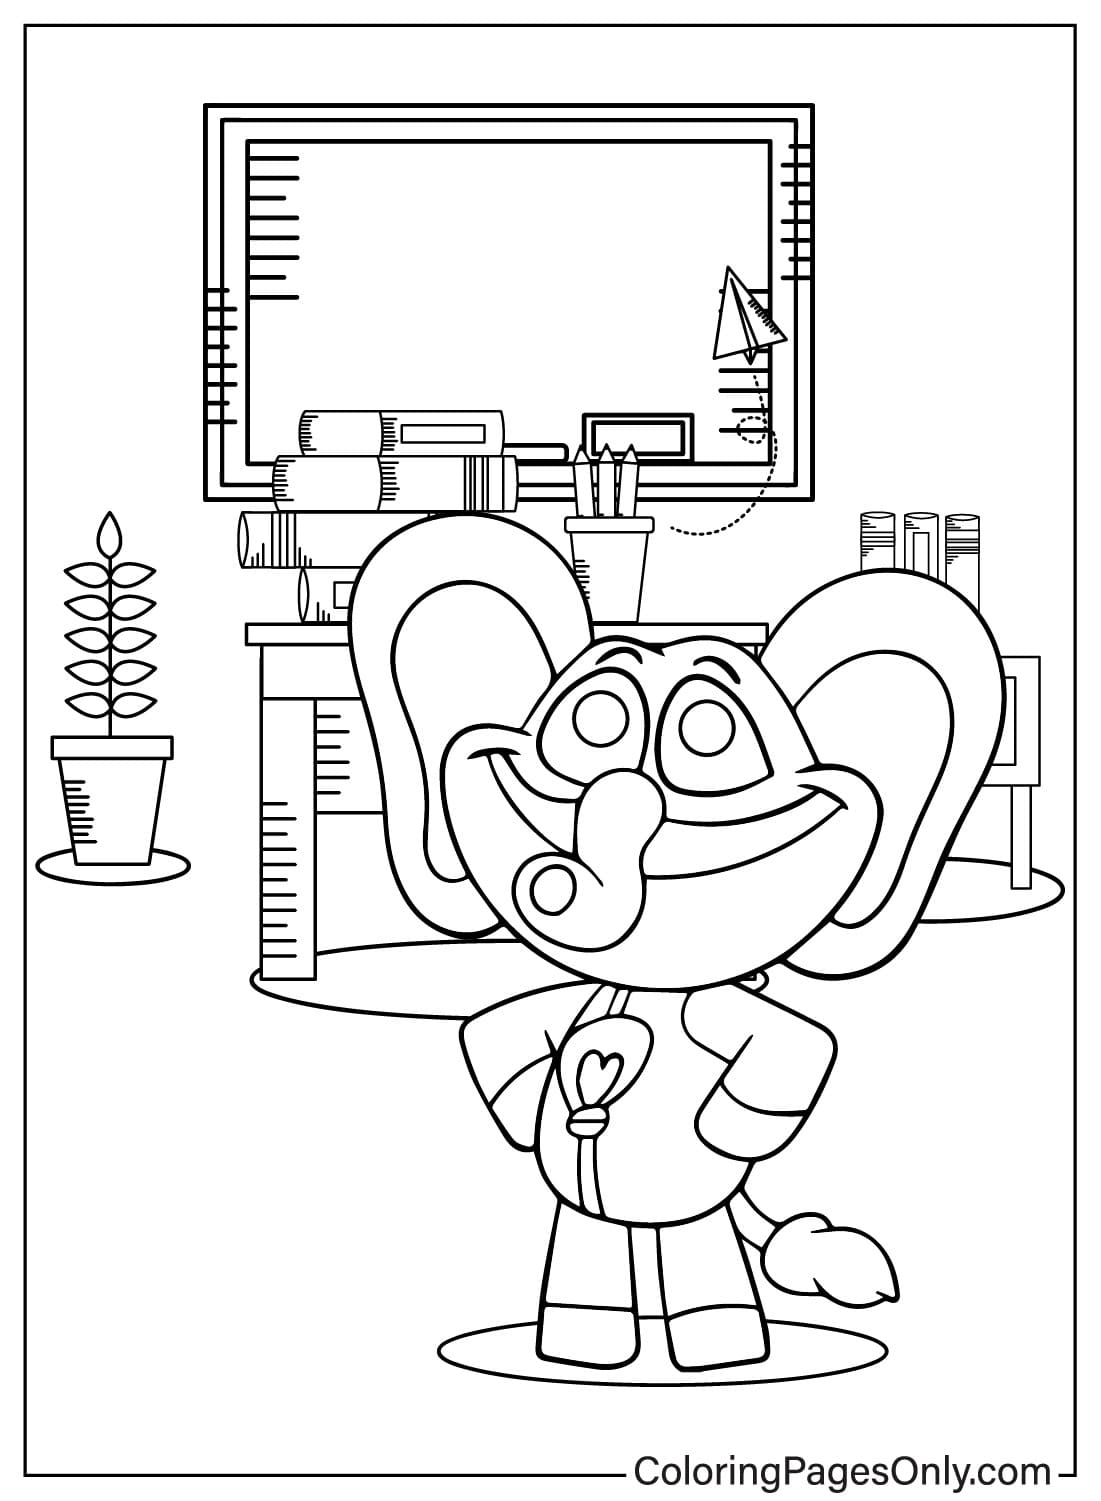 Images Bubba Bubbaphant Coloring Page from Bubba Bubbaphant